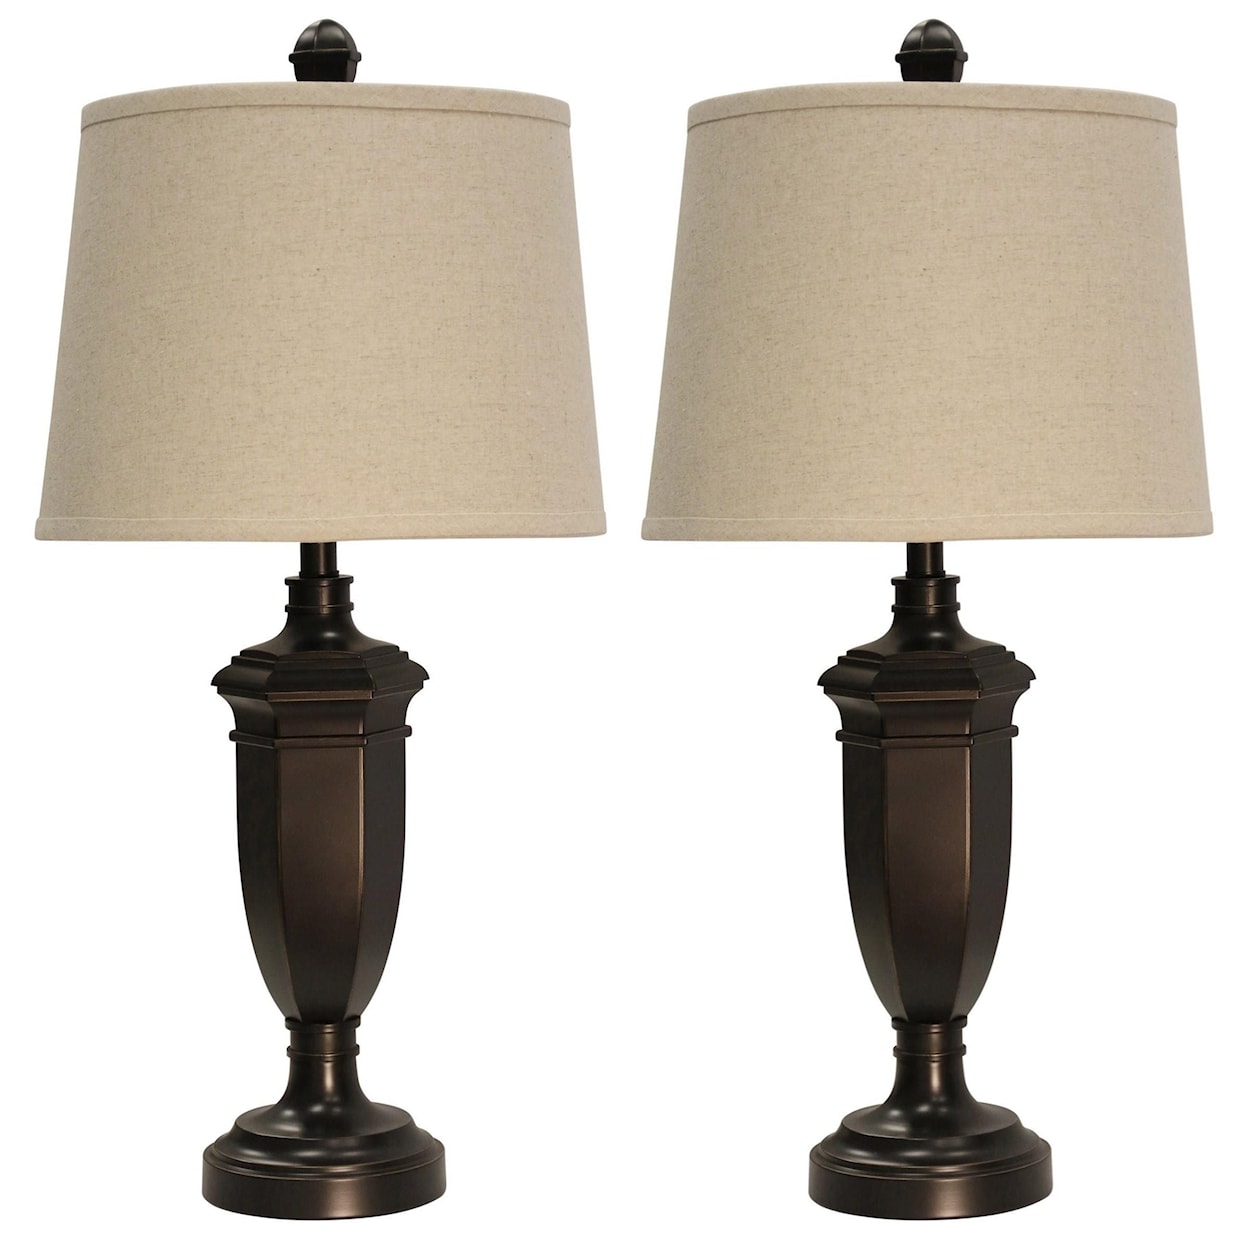 StyleCraft Lamps Molded Table Lamps